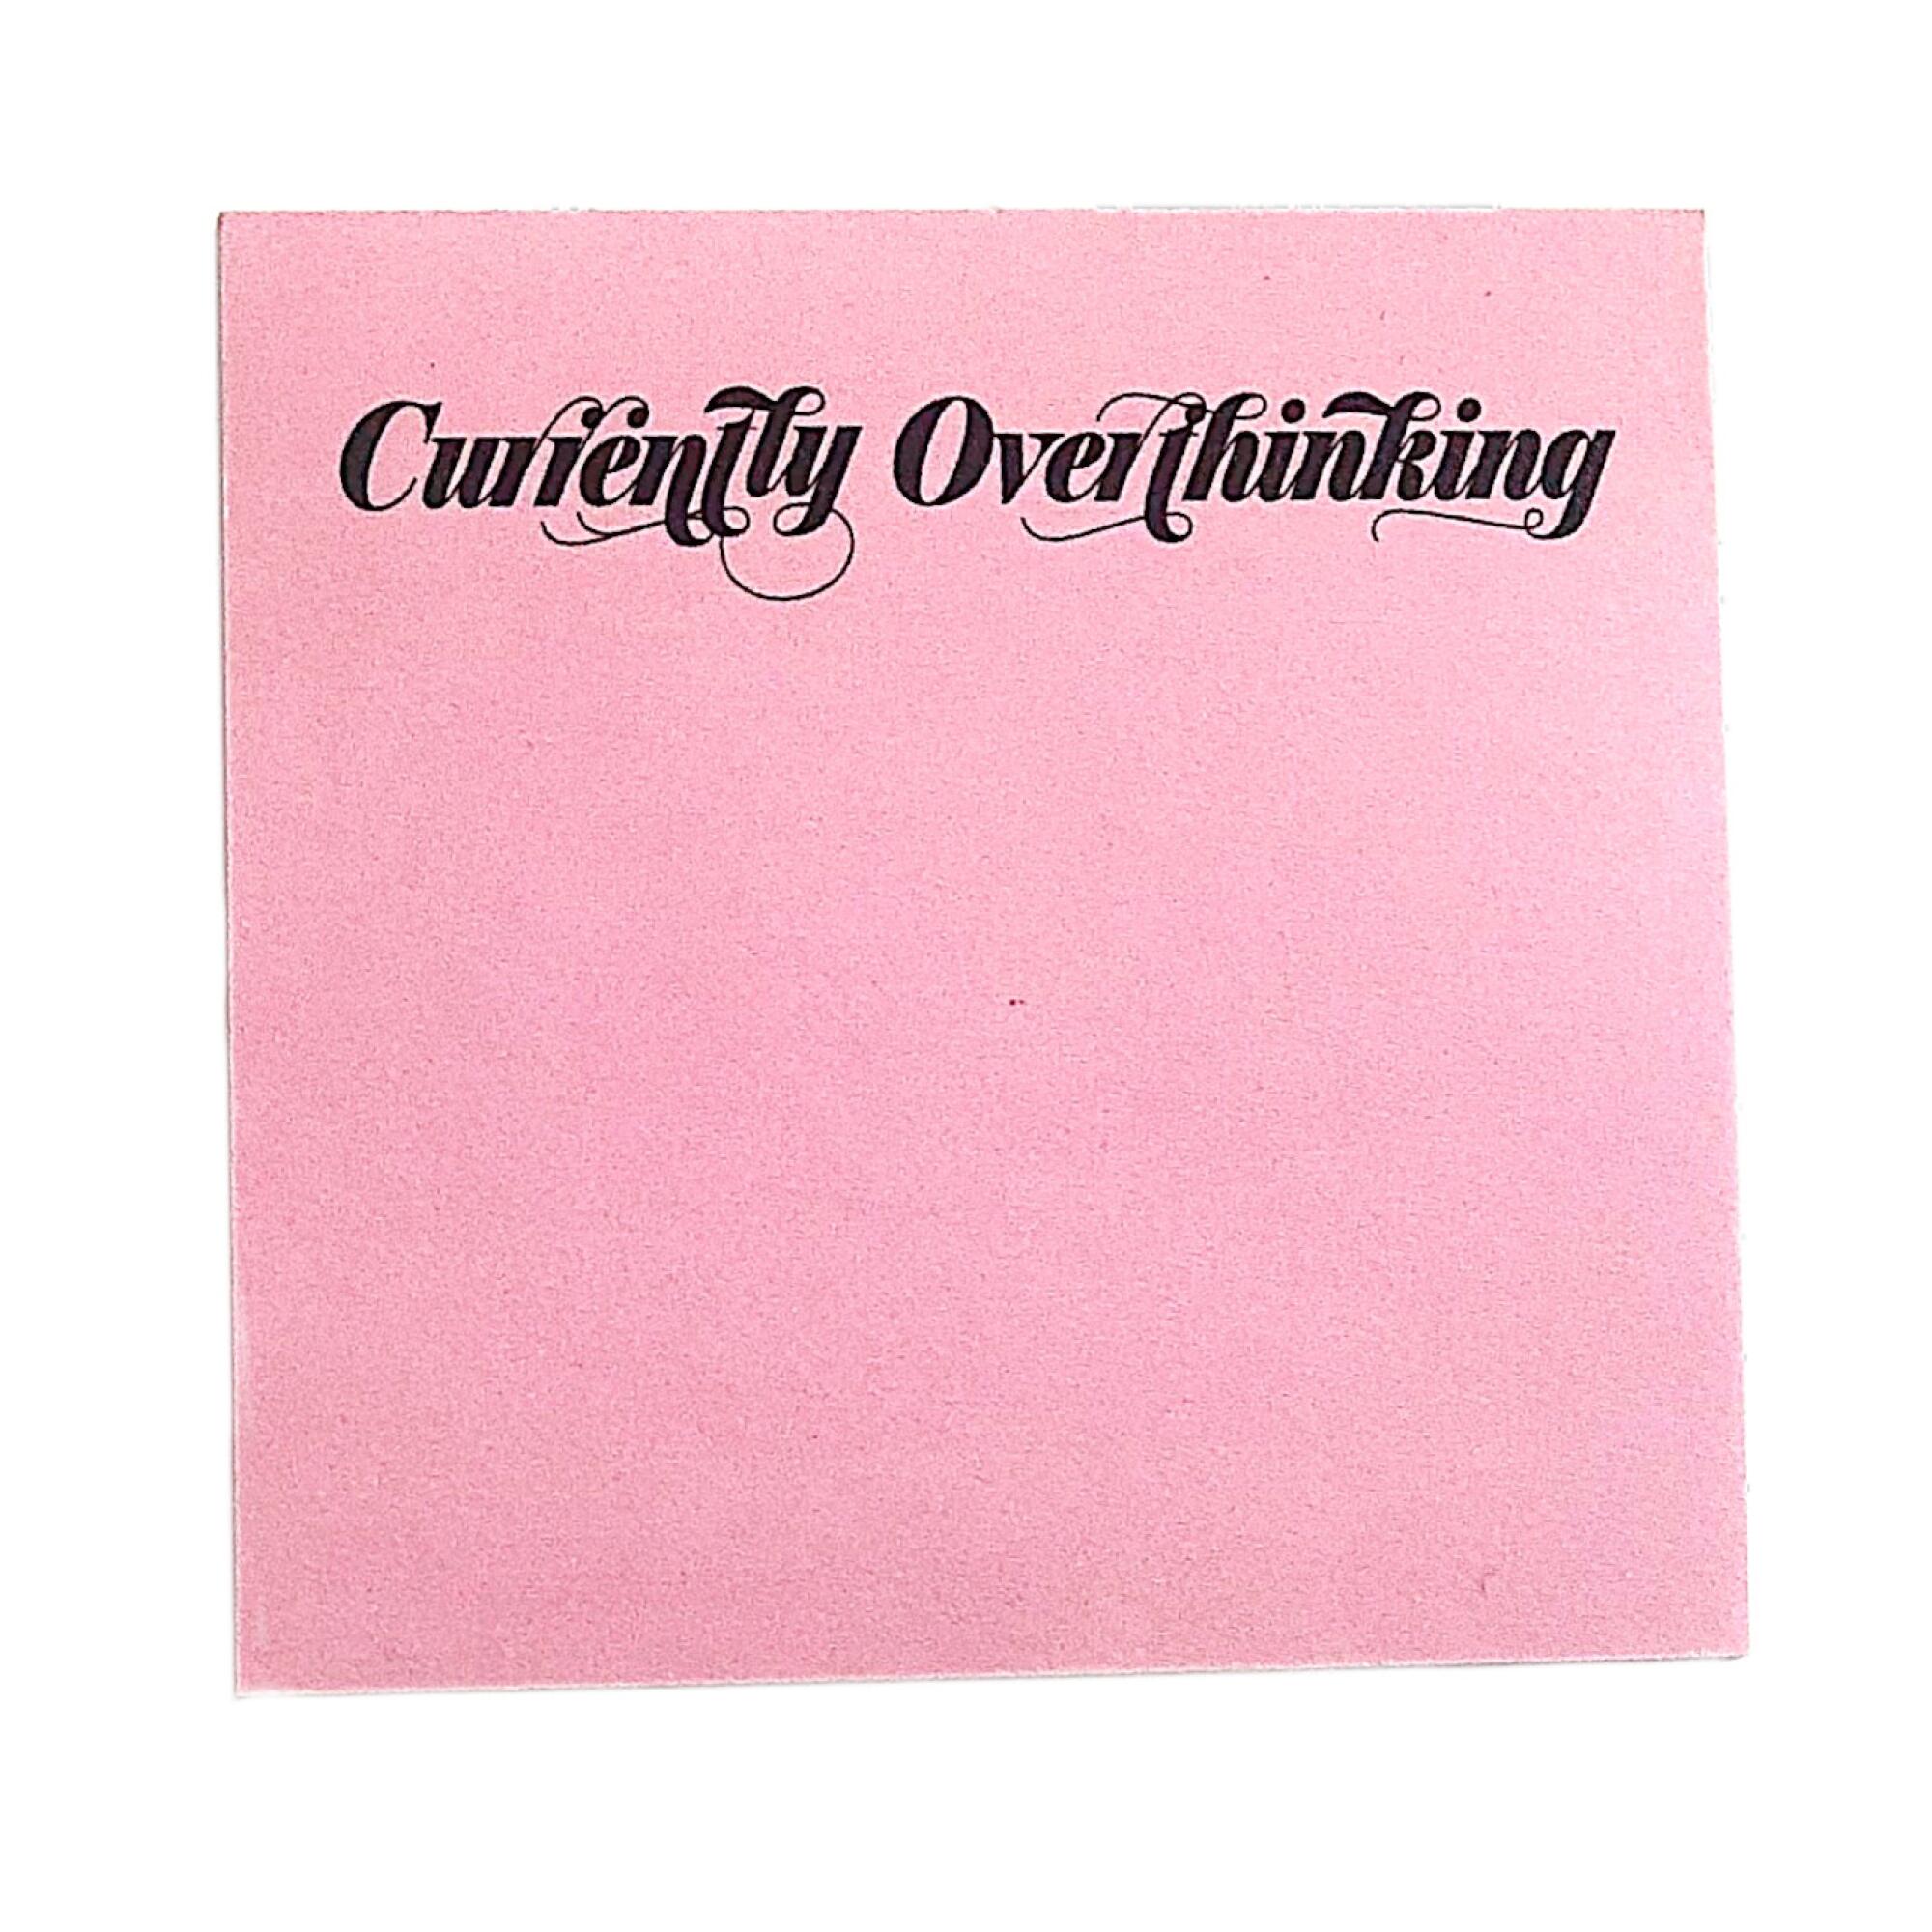 A pink pad of Post-it notes with "Currently overthinking" printed at the top